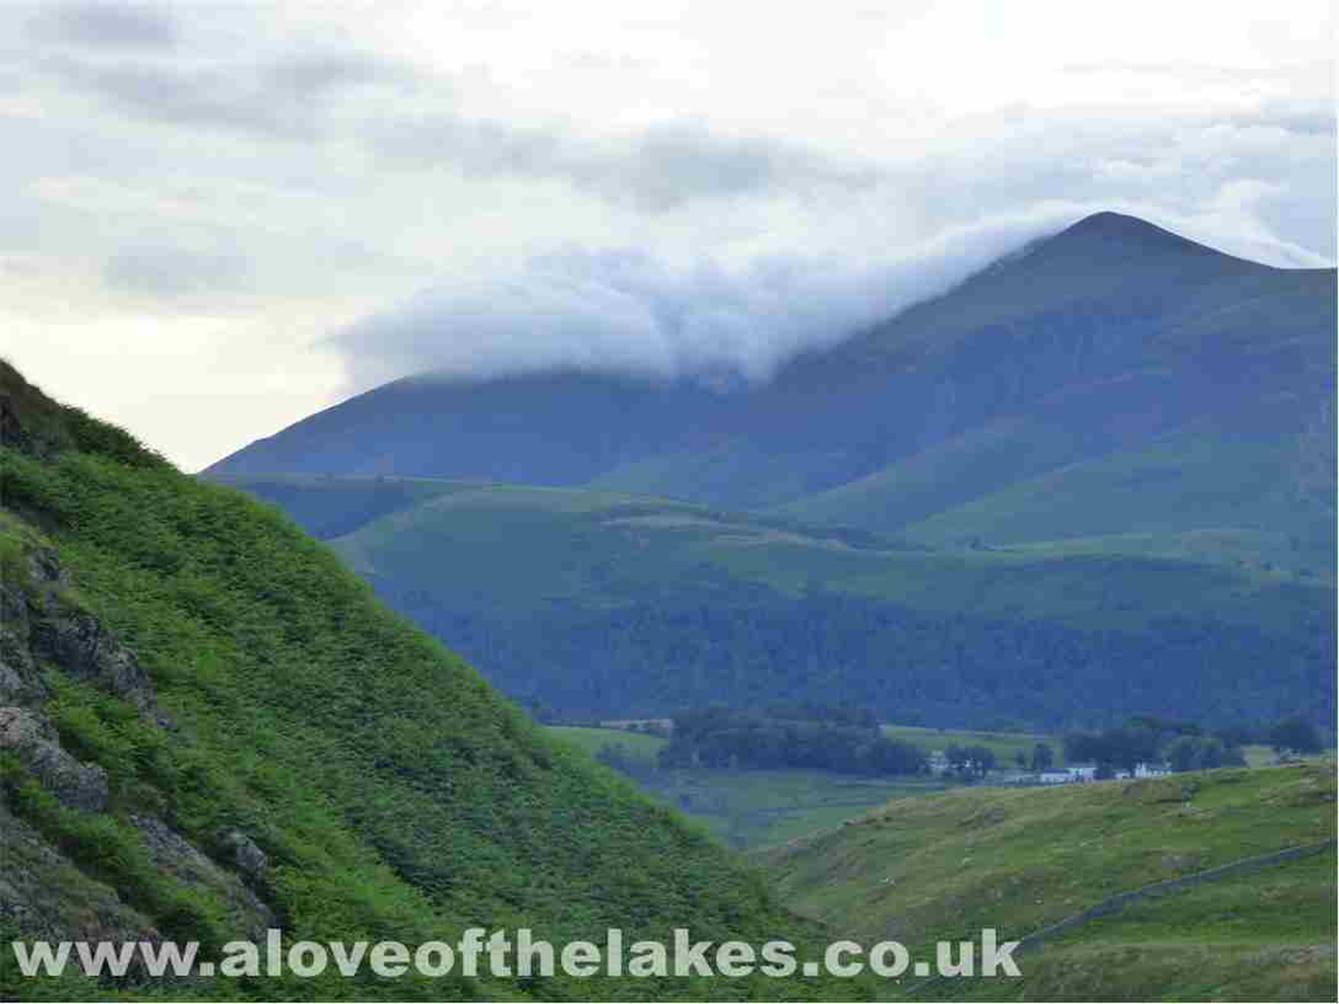 Cloud tumbling down the South face of Skiddaw